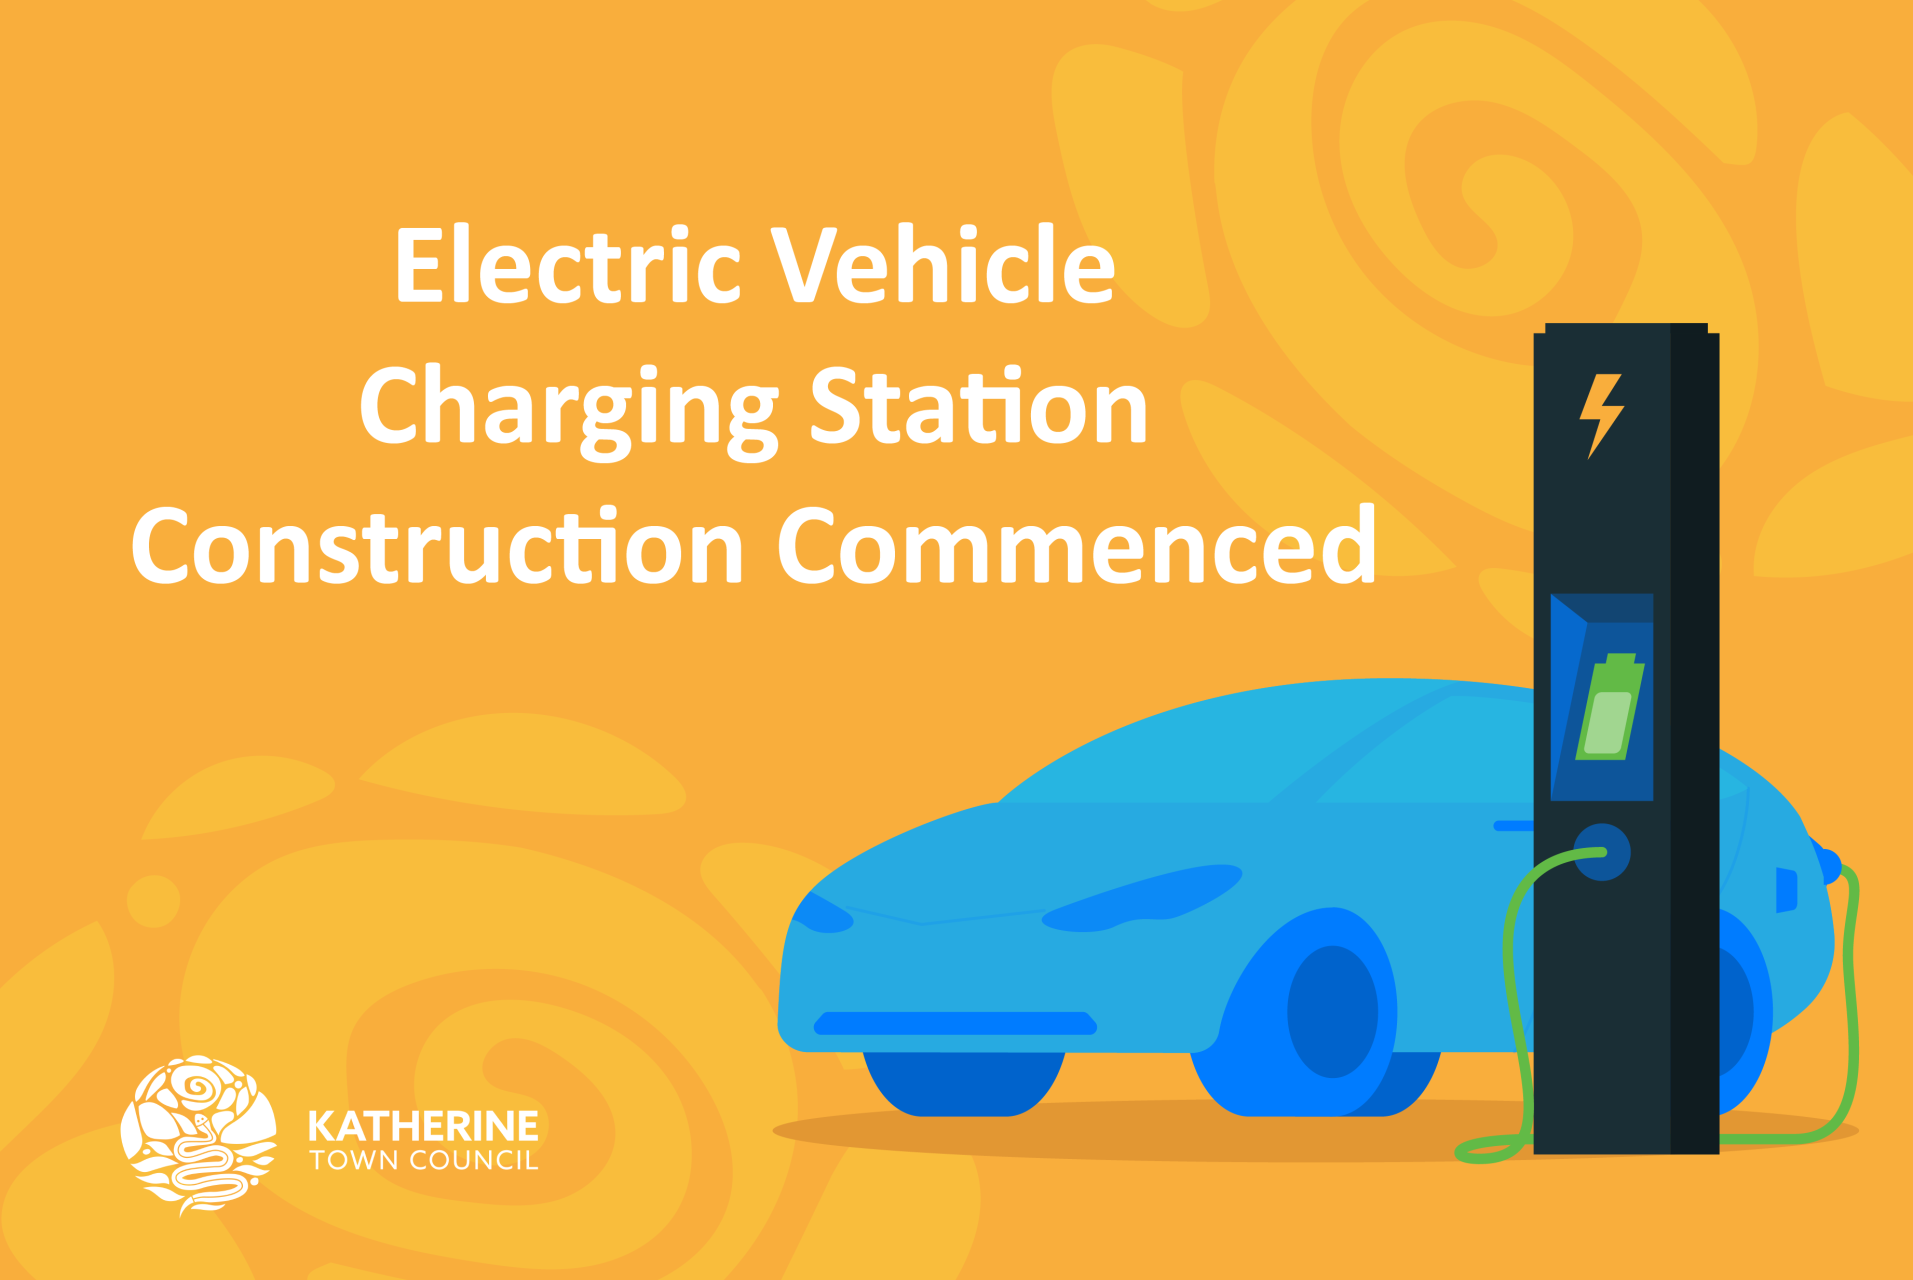 Media Release - Electric Vehicle Charging Station Under Construction at